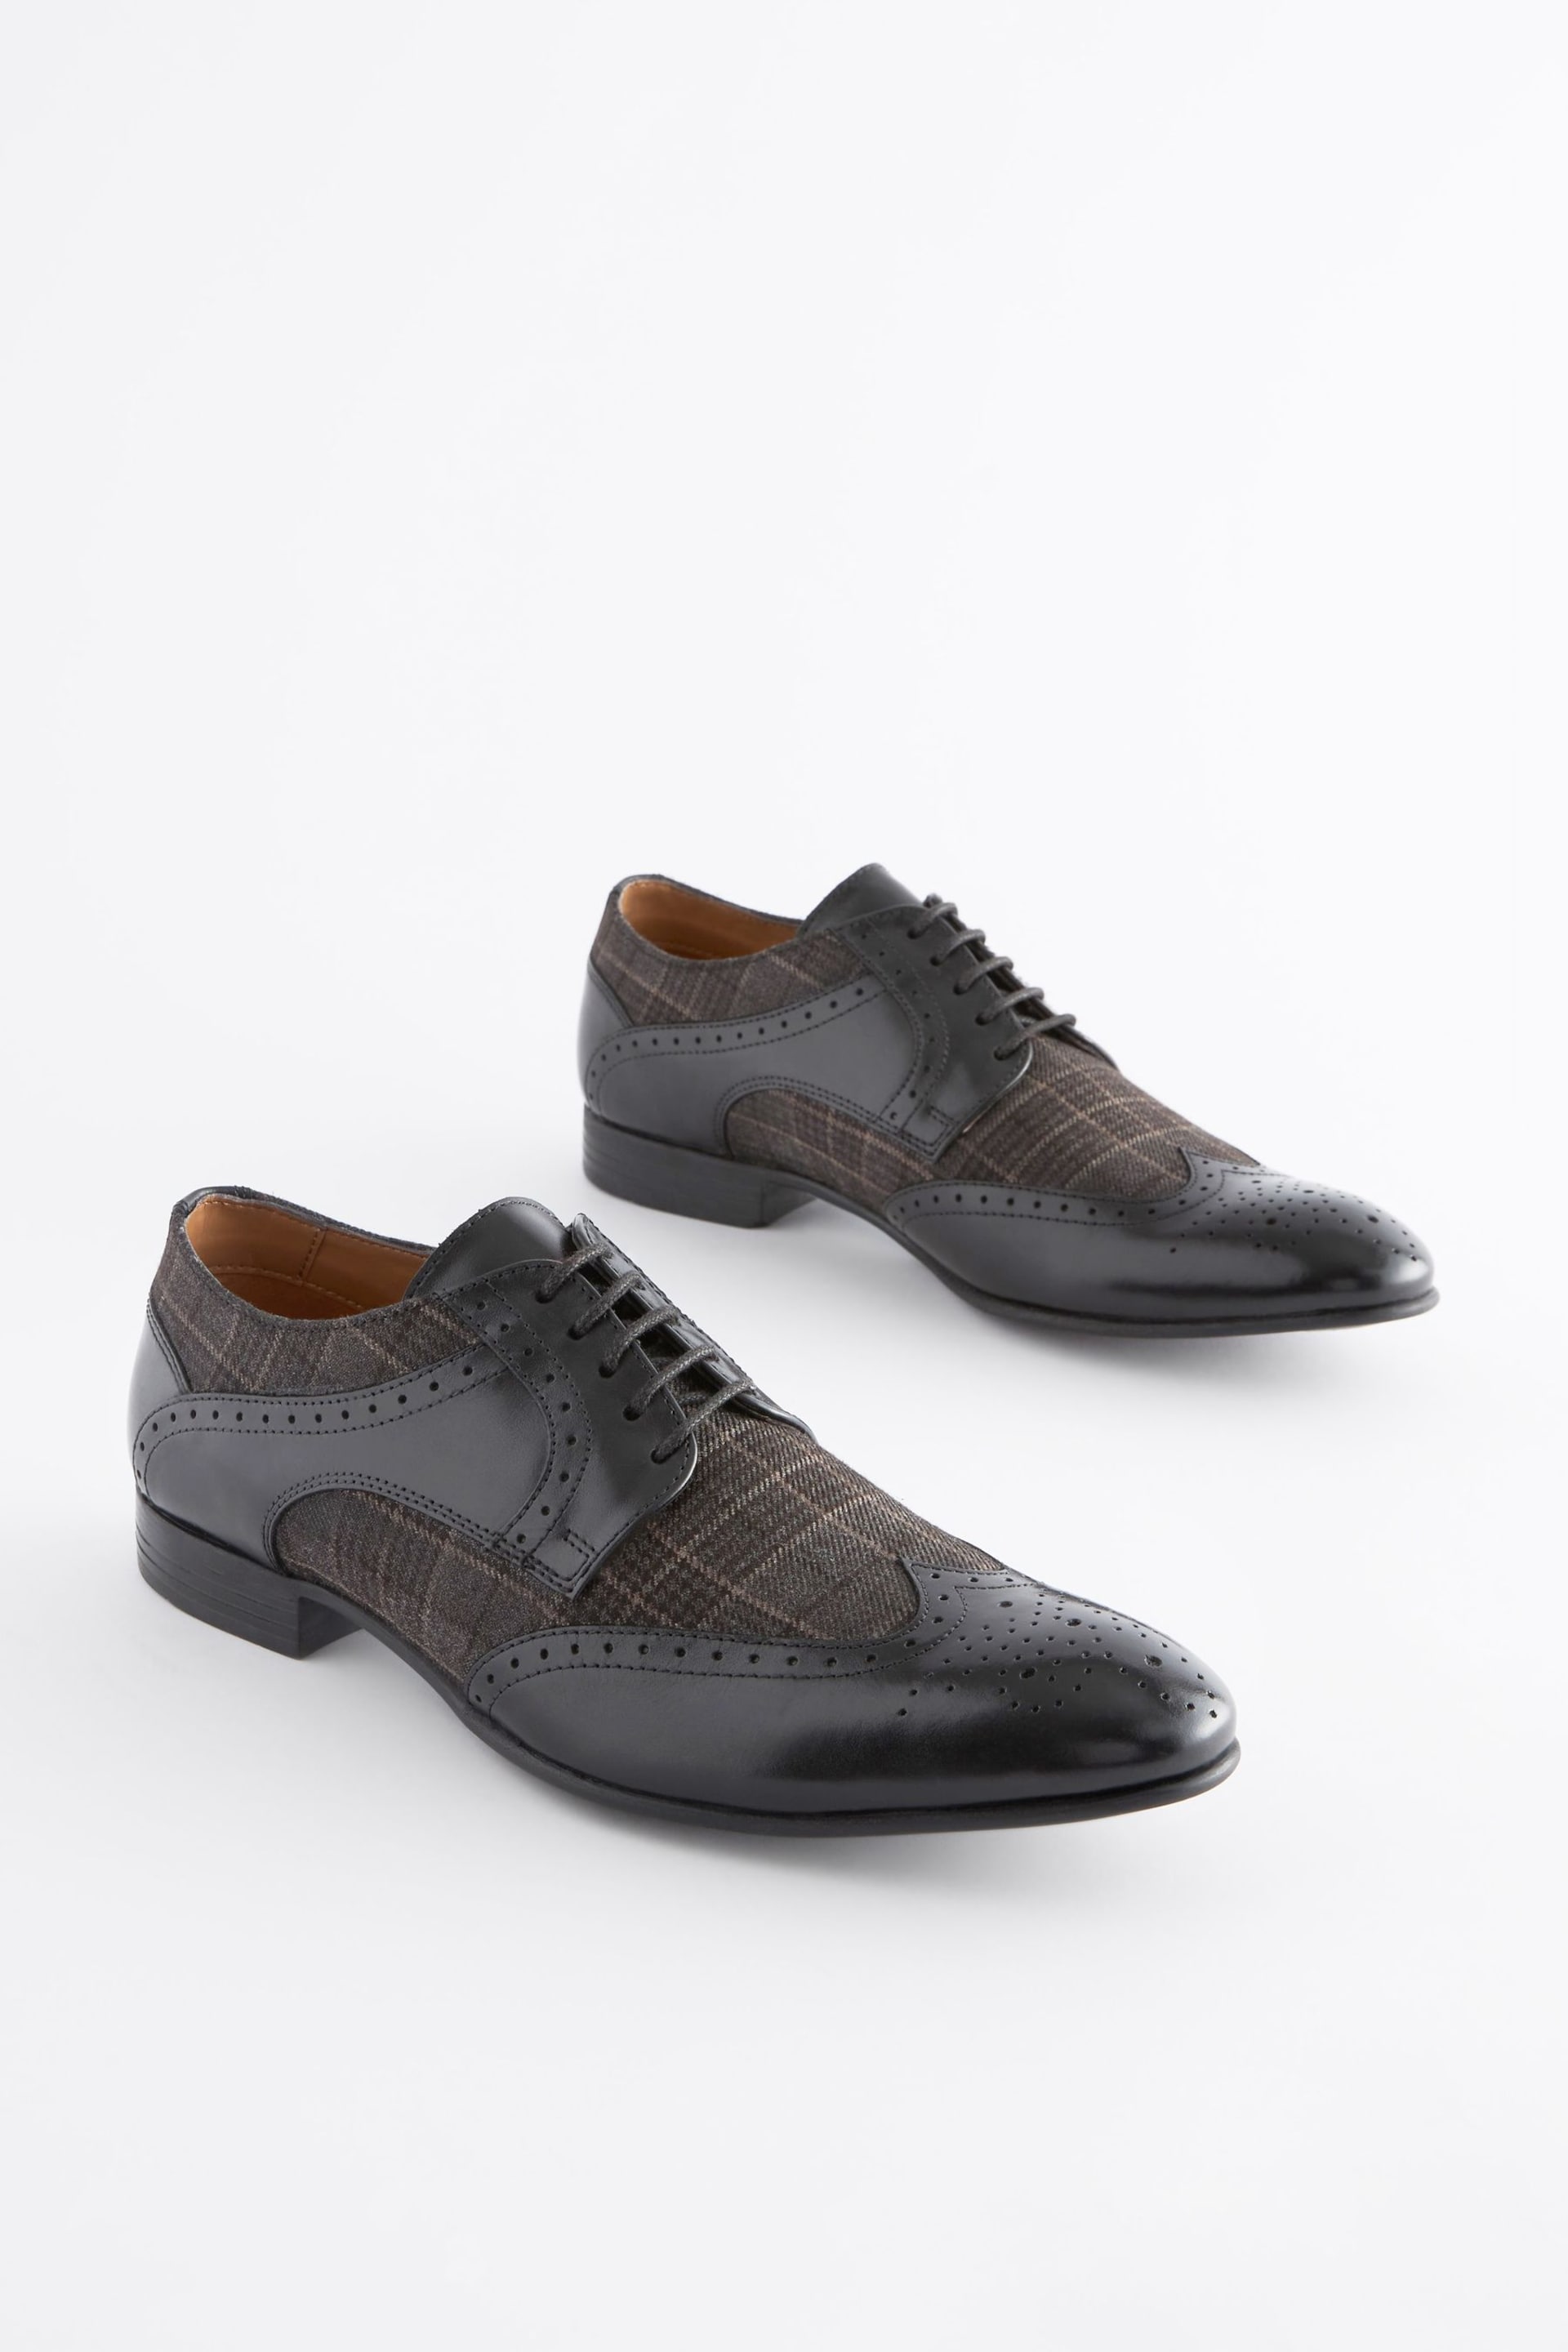 Black Leather & Check Brogue Shoes - Image 2 of 7